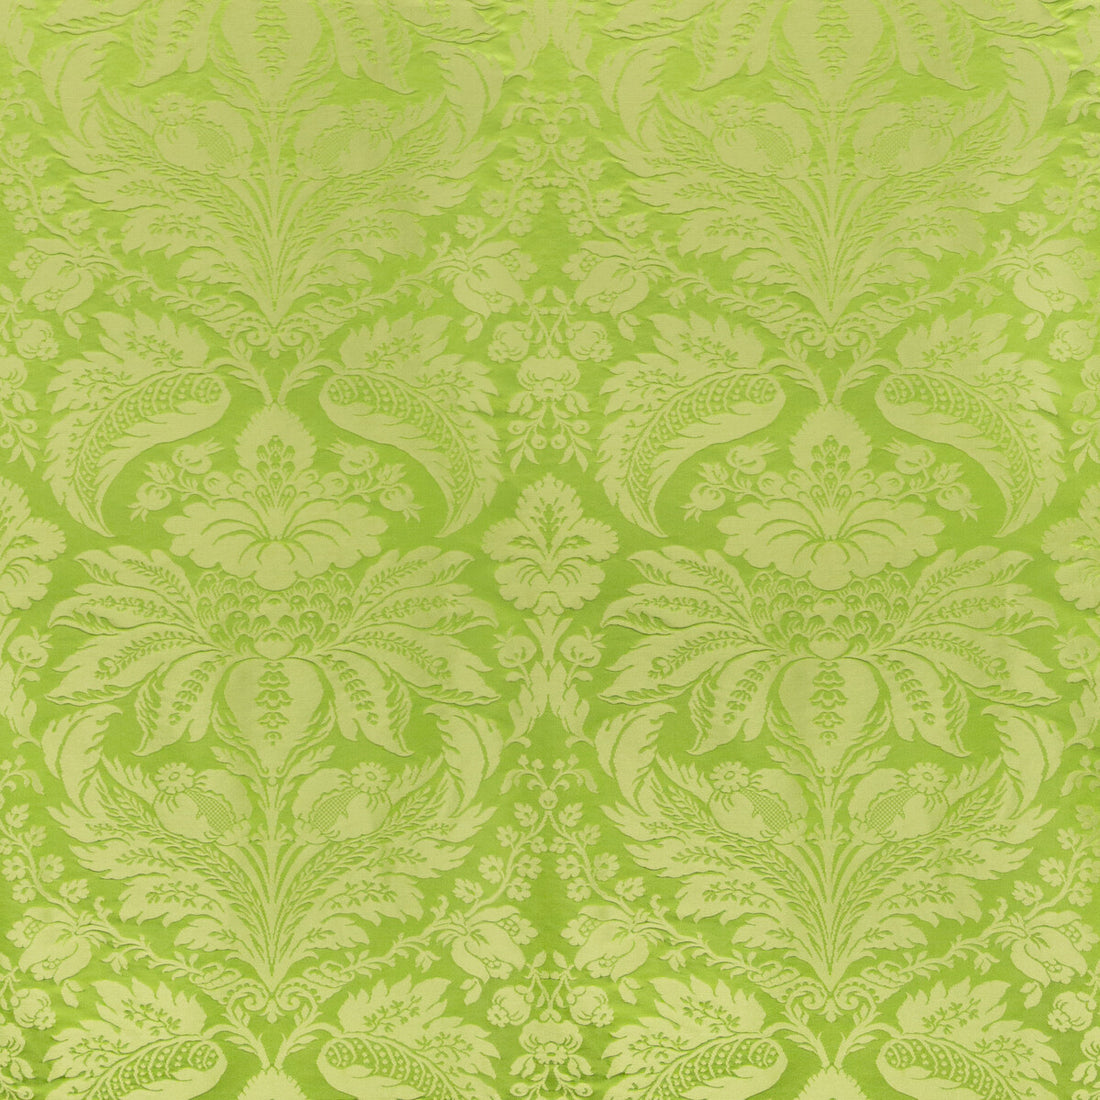 Damask Pierre fabric in green color - pattern 8013188.33.0 - by Brunschwig &amp; Fils in the B&amp;F Showroom Exclusive 2019 collection